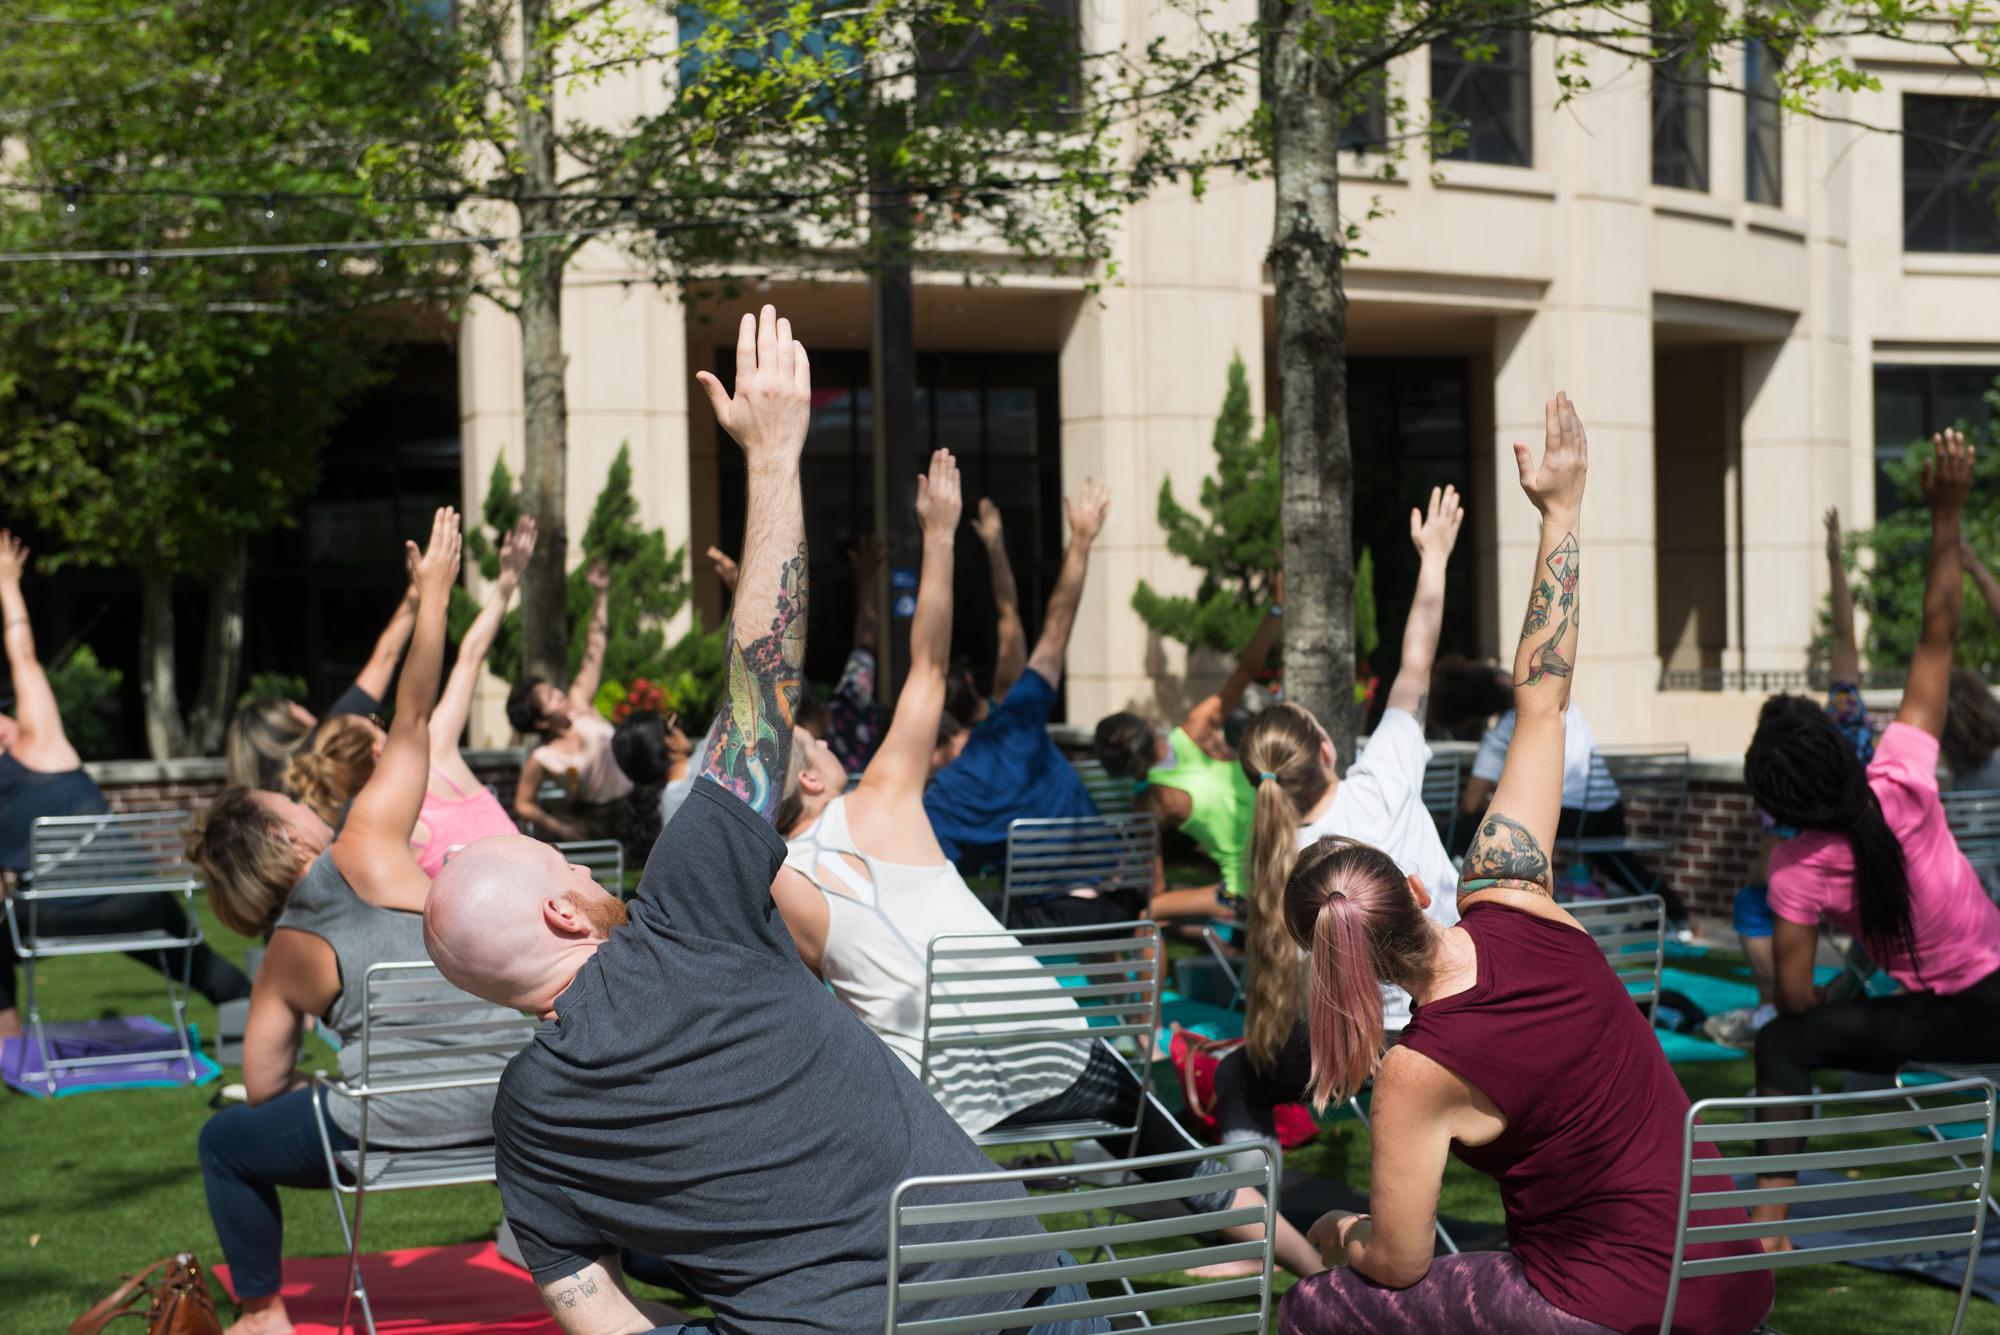 Group Yoga done outside on boyd plaza grass area